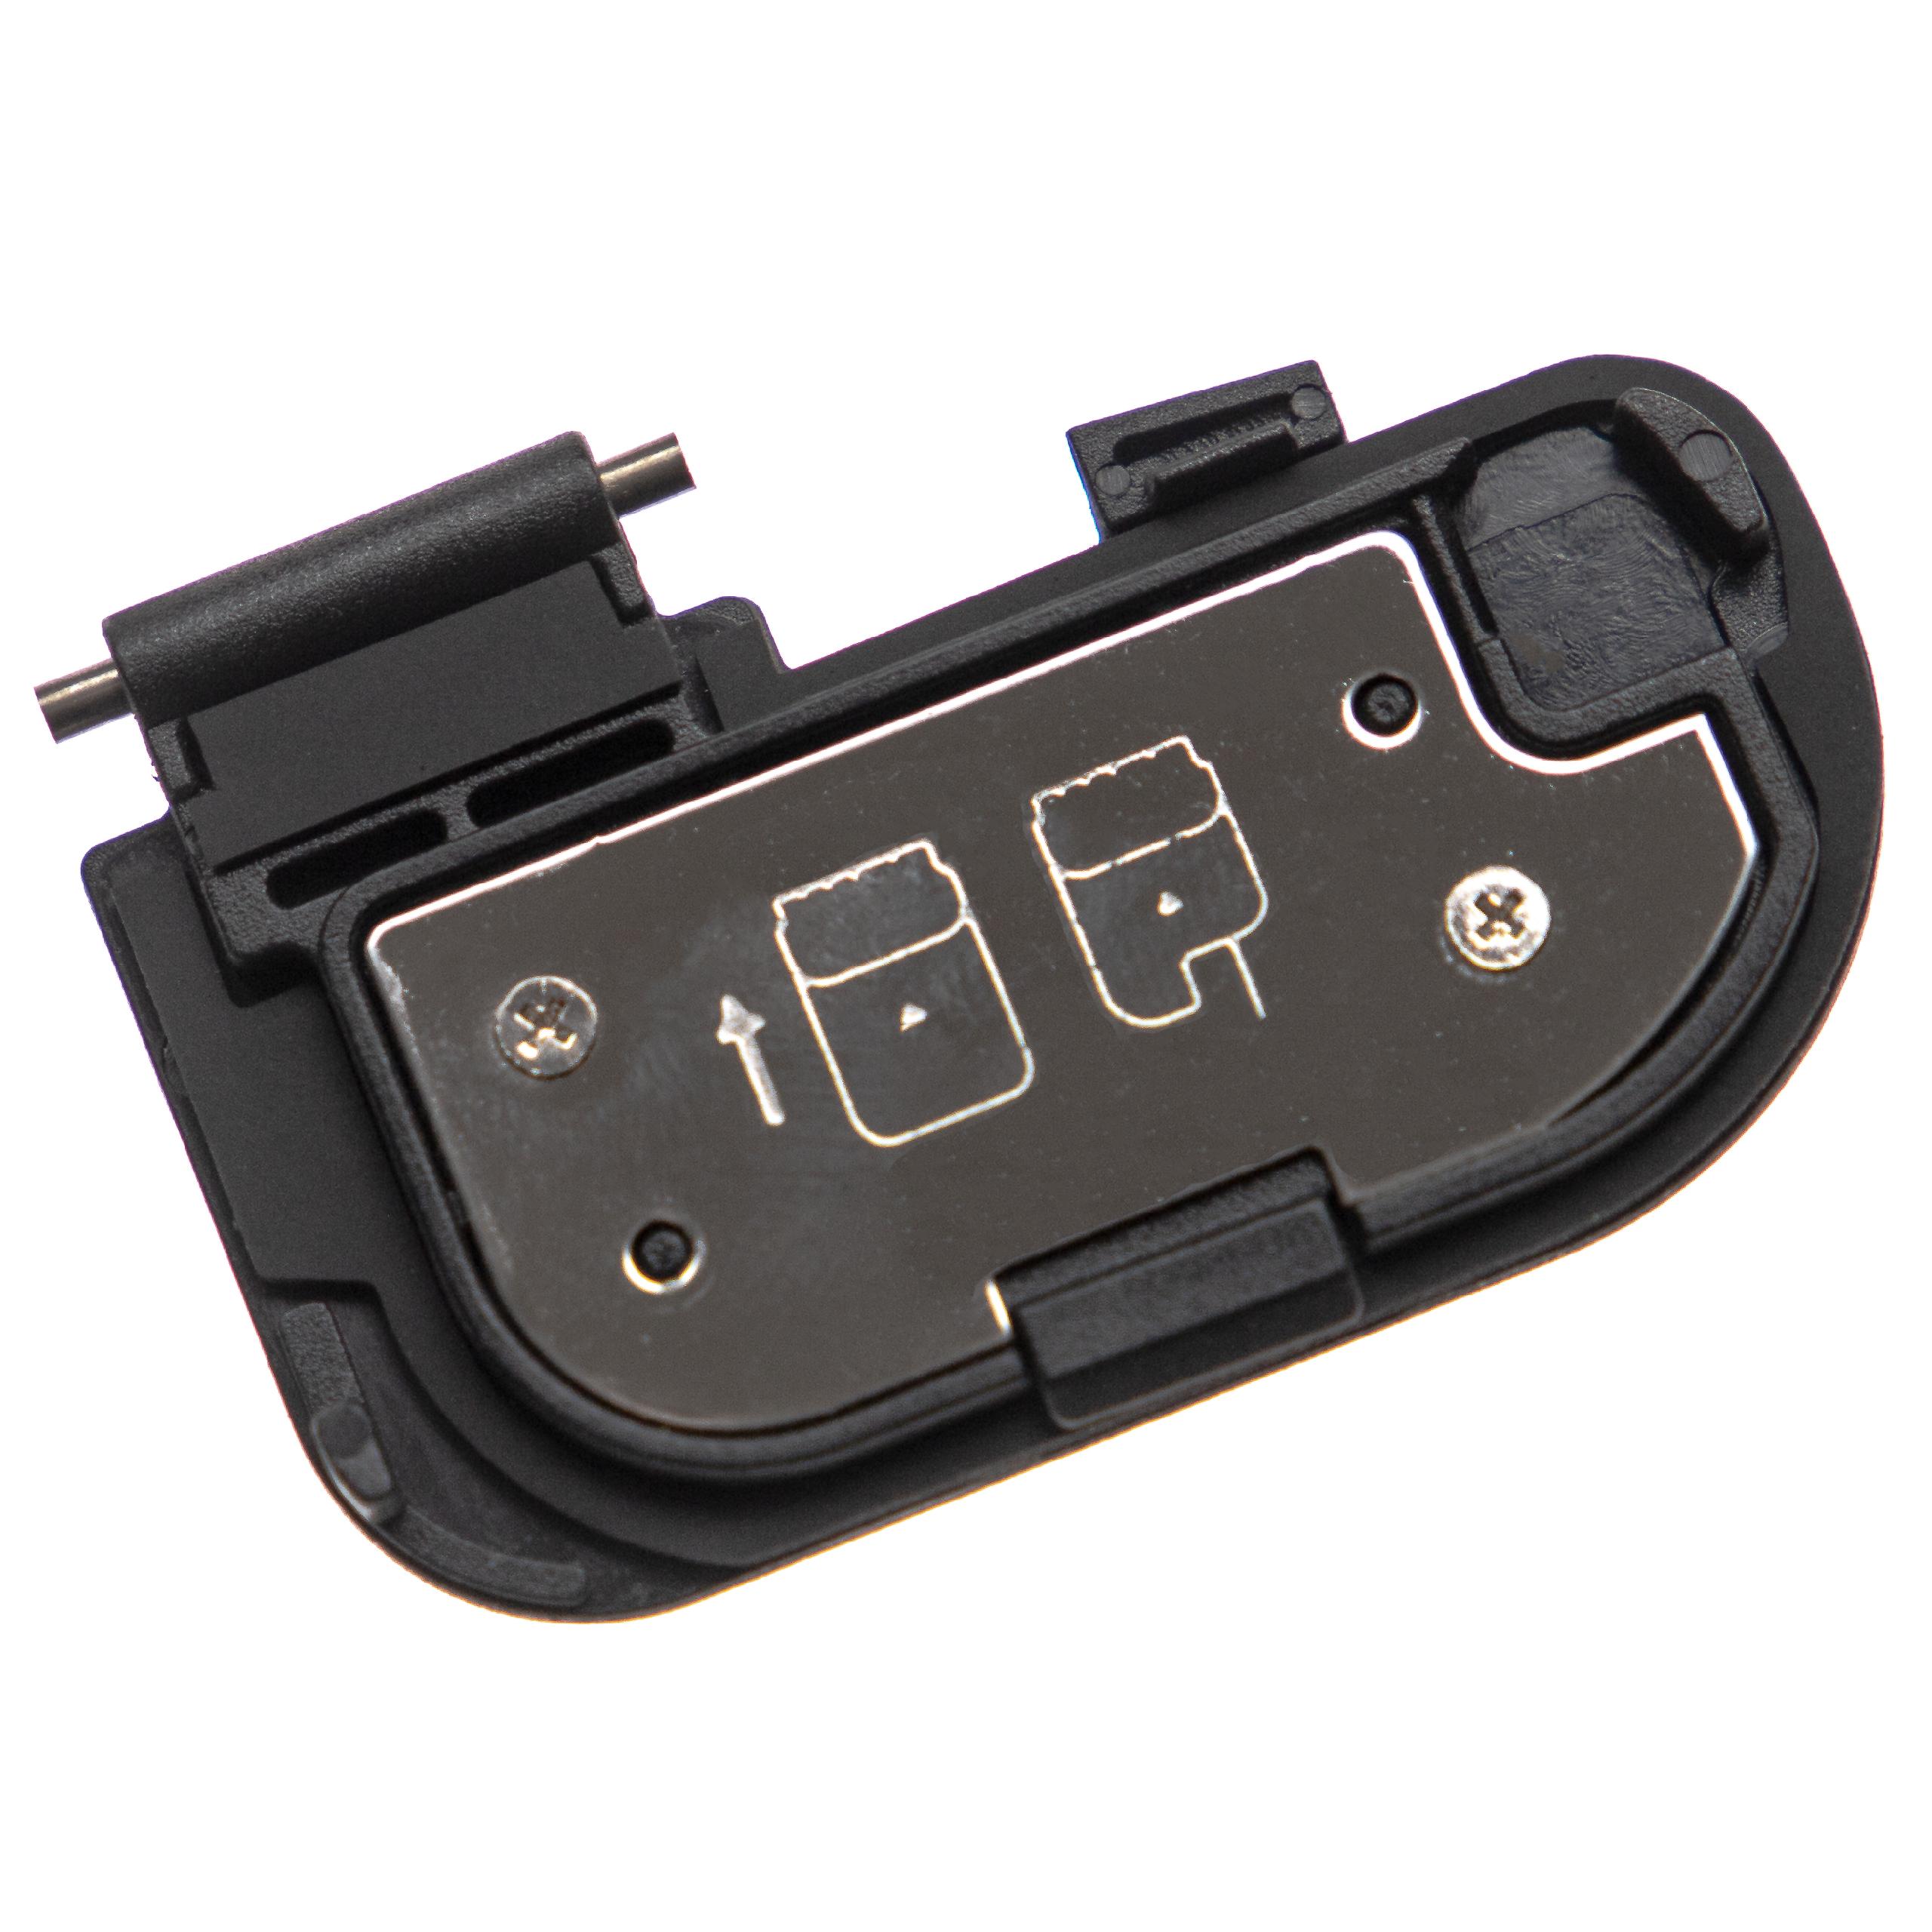 Battery Door Cover suitable for Canon EOS 80D Camera, Battery Grip